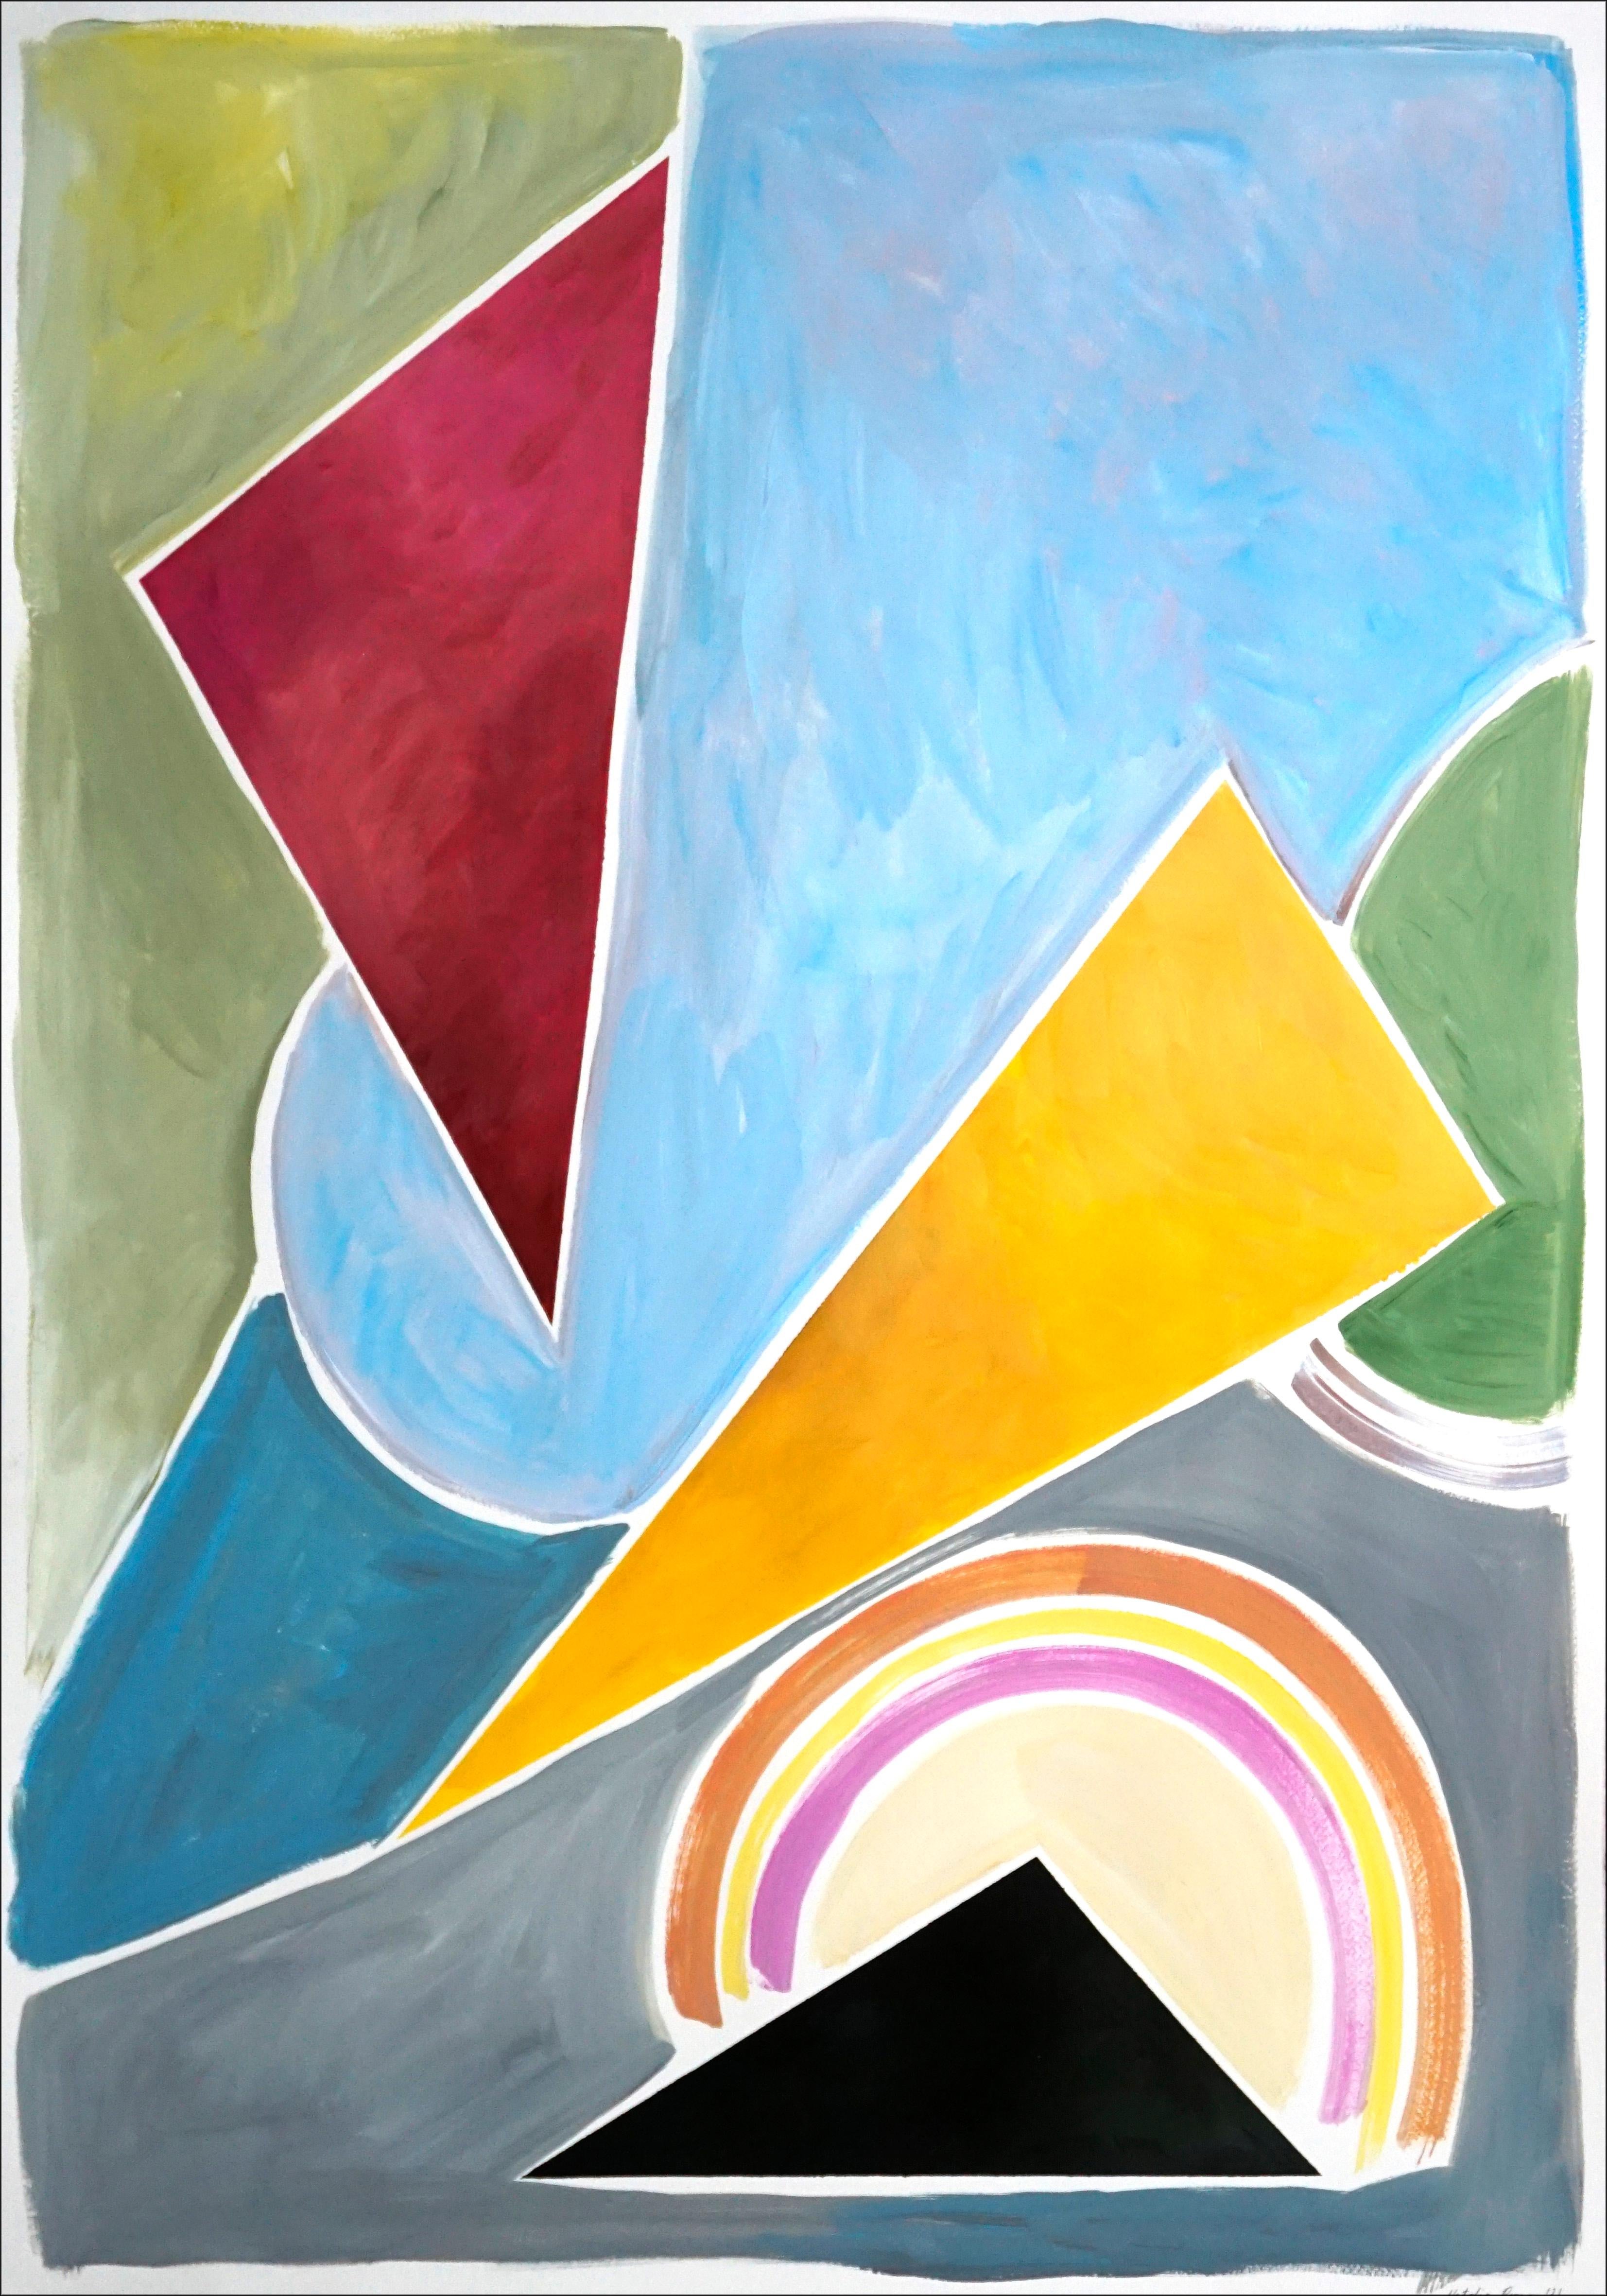 Constructivist Triangles in Primary Tones, Abstract Geometric Shapes Red, Yellow